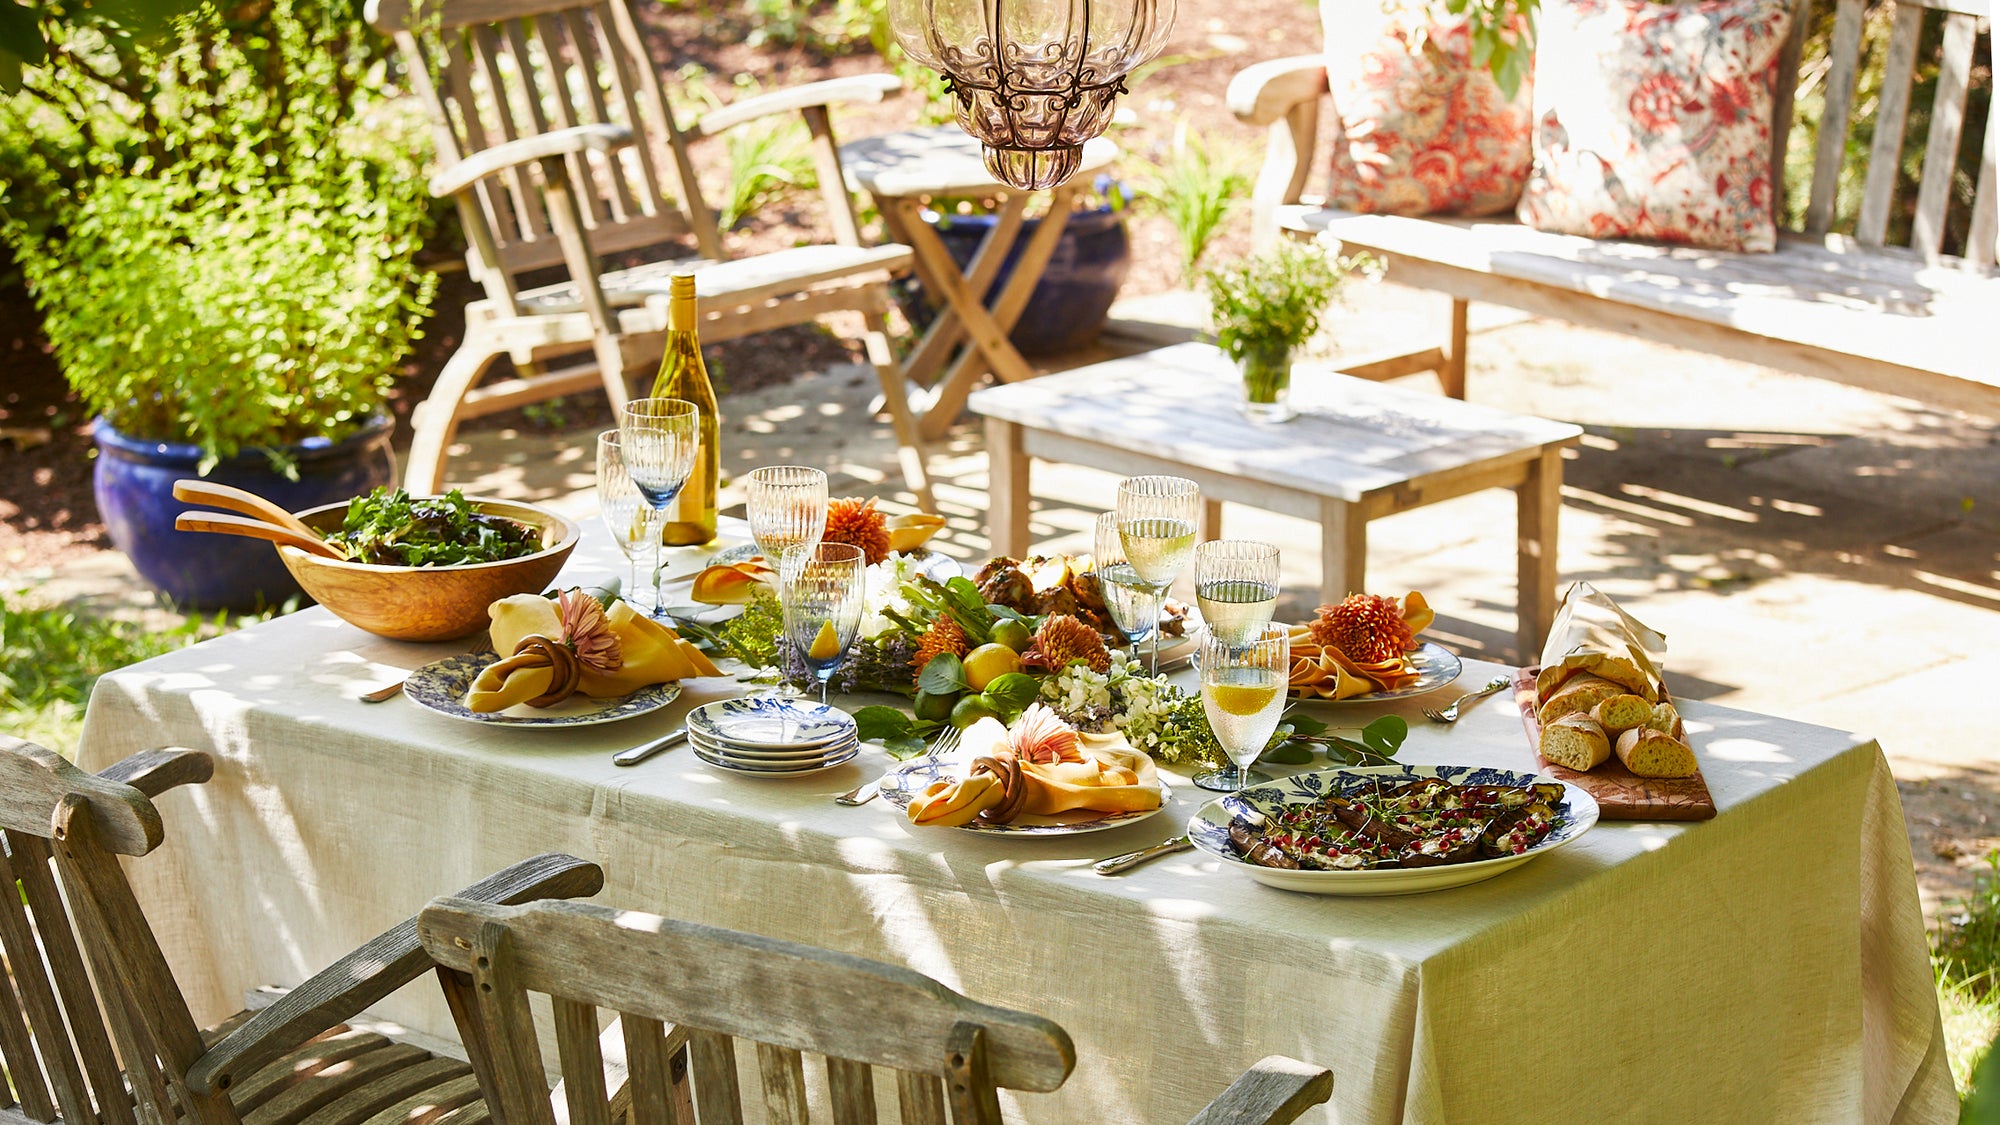 Outdoor entertaining with a beautiful table on a terrace set with Quinn glassware and porcelain dinnerware from Caskata